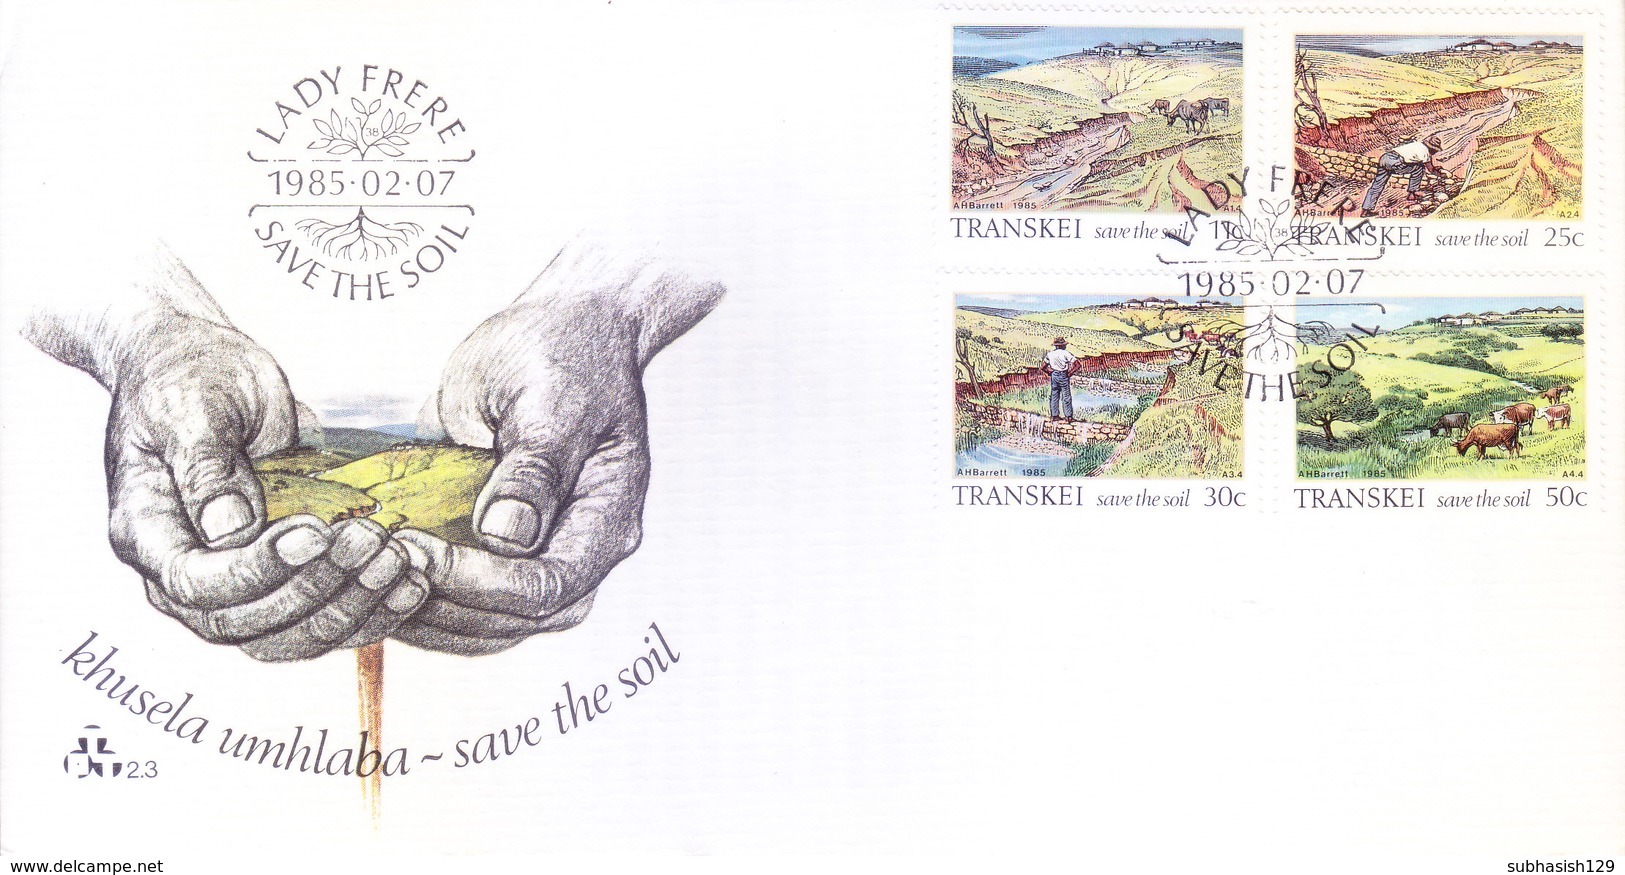 TRANSKEI / SOUTH AFRICA : FIRST DAY COVER WITH INFORMATION BROCHURE INSIDE : KHUSELA UMBHABA SAVE THE SOIL - 07-02-1985 - Transkei